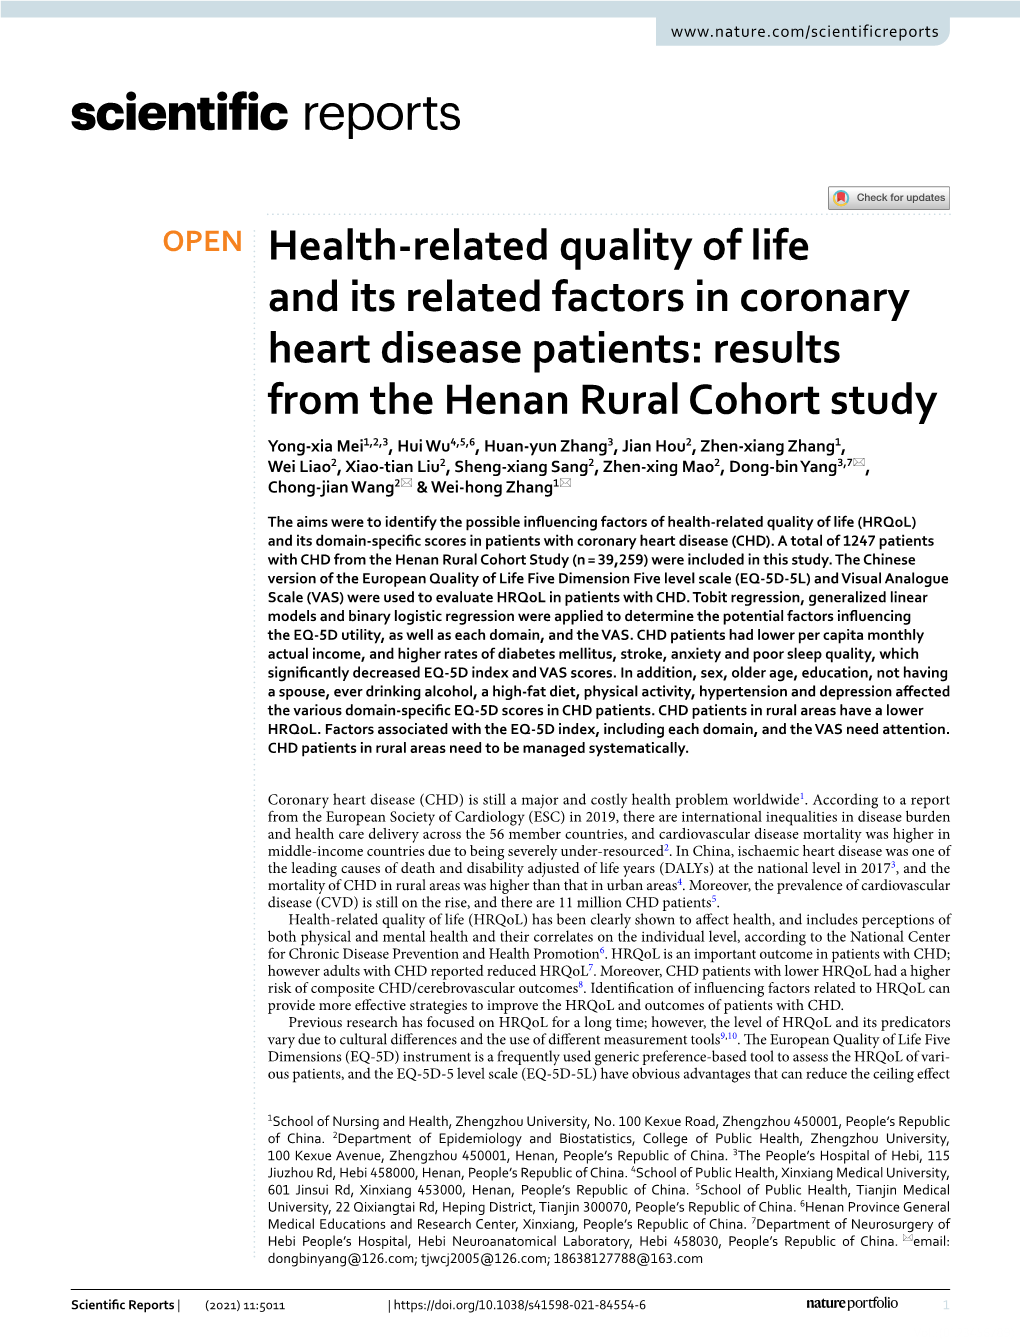 Health-Related Quality of Life and Its Related Factors in Coronary Heart Disease Patients